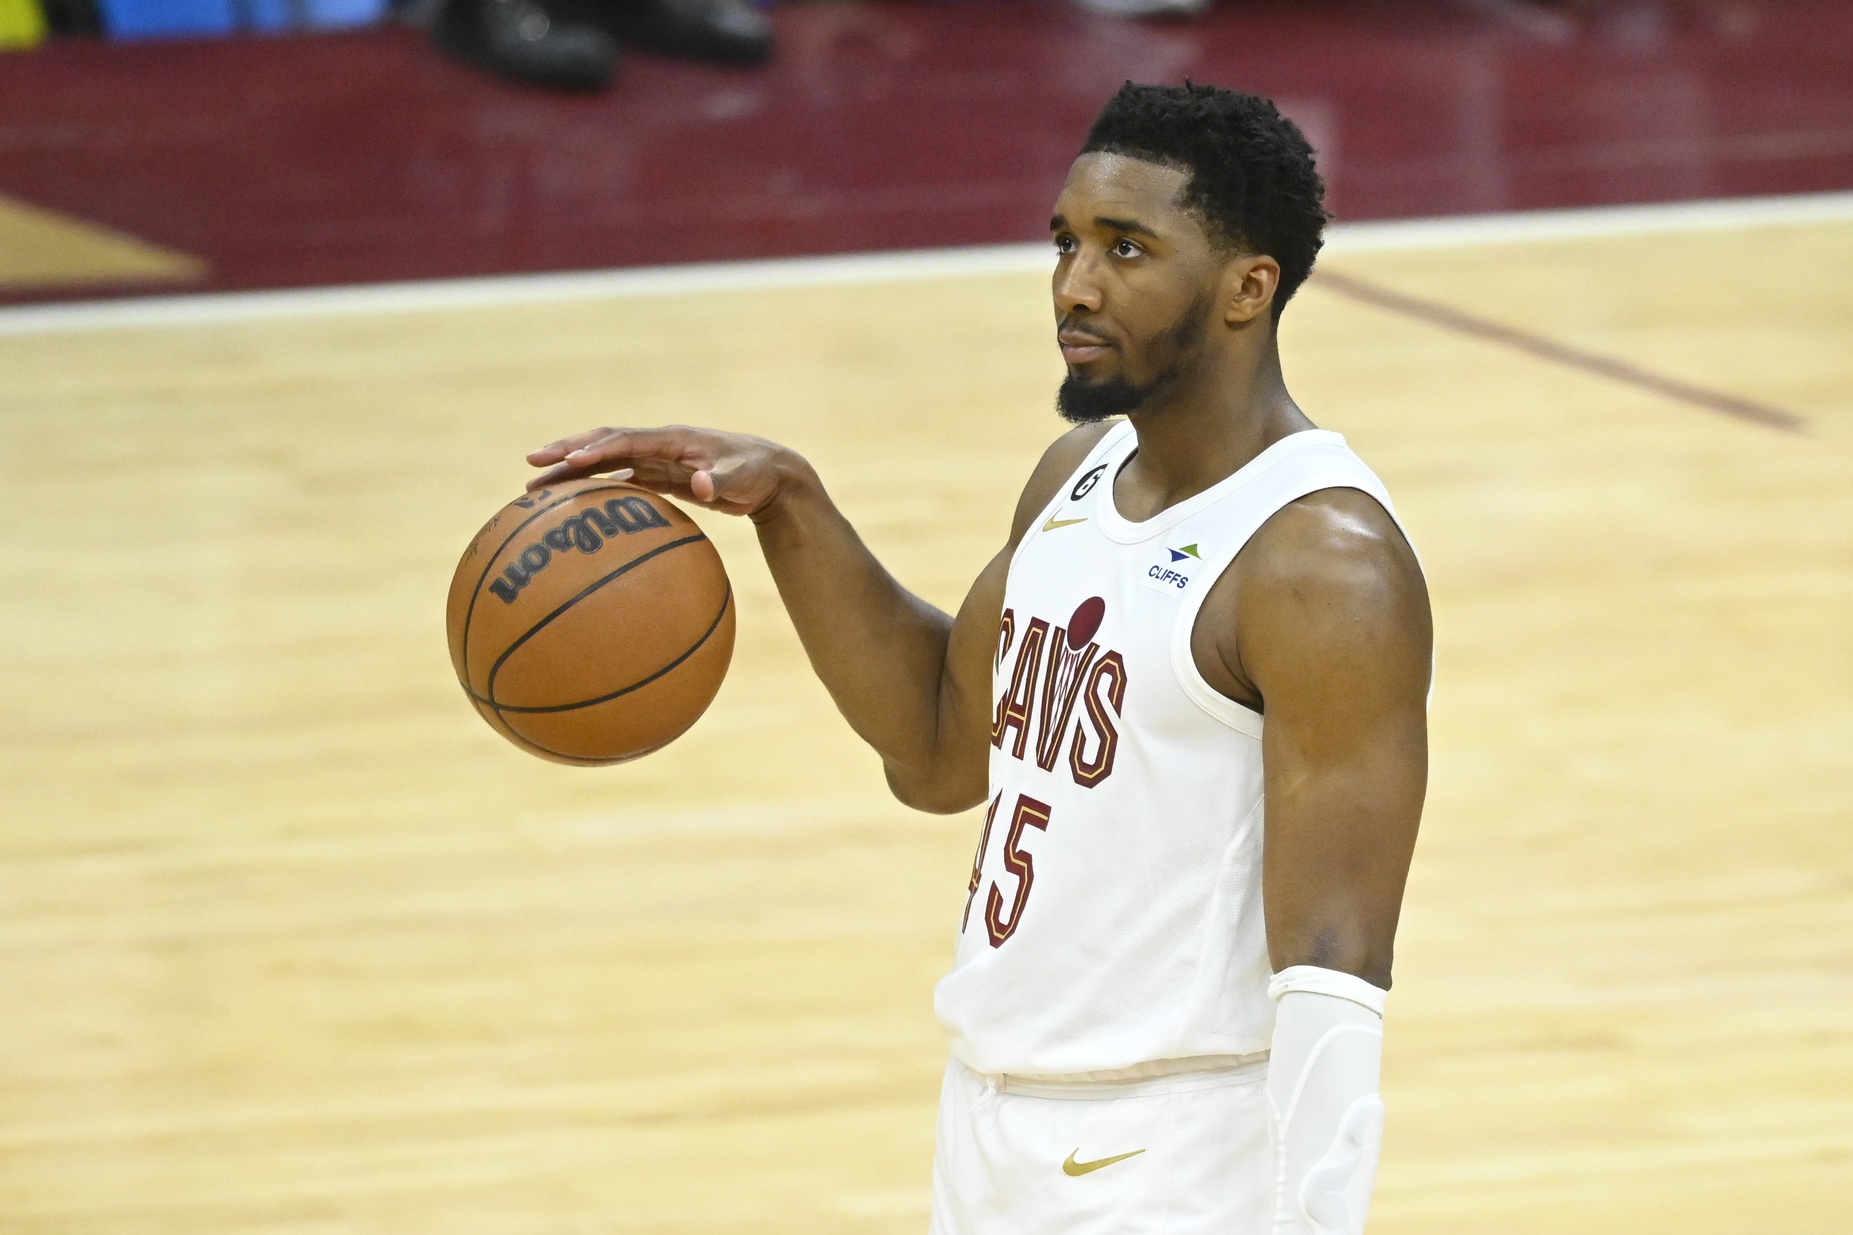 Look for Cavs' Donovan Mitchell to get back on track heading into 2023